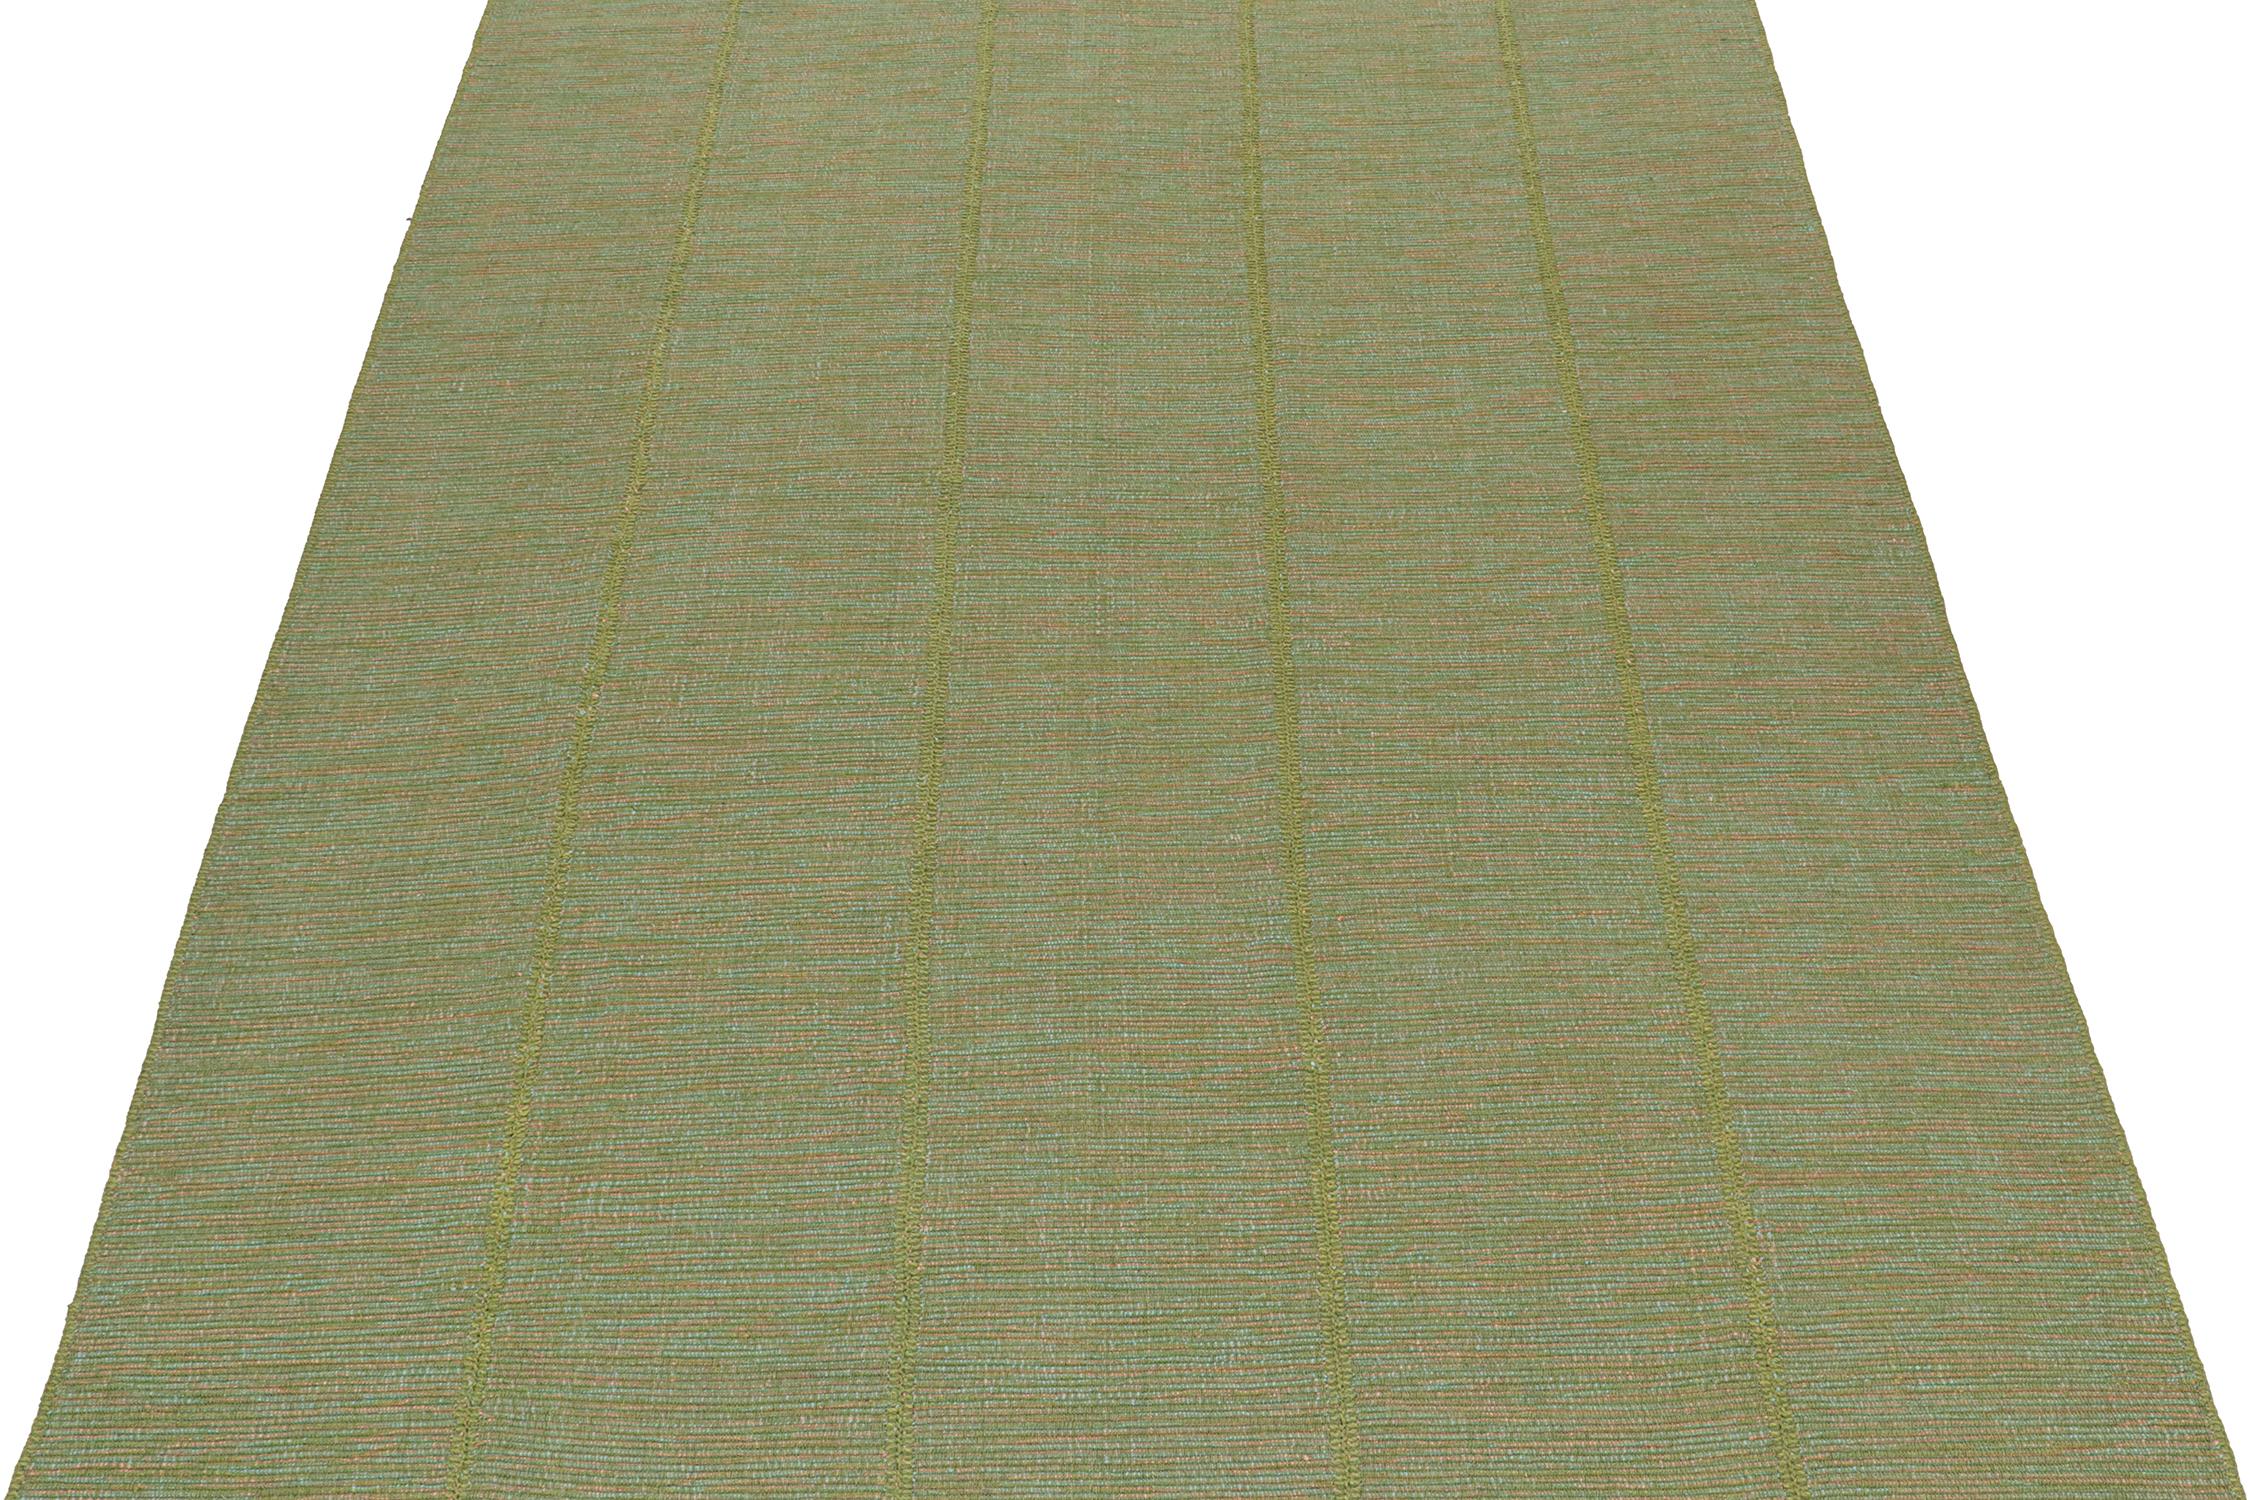 Handwoven in wool, this 9x12 Kilim is from a bold new line of contemporary flatweaves by Rug & Kilim.

Further On the Design:

The “Rez Kilim” connotes a modern take on Classic panel weaving. This edition enjoys chartreuse green with teal and